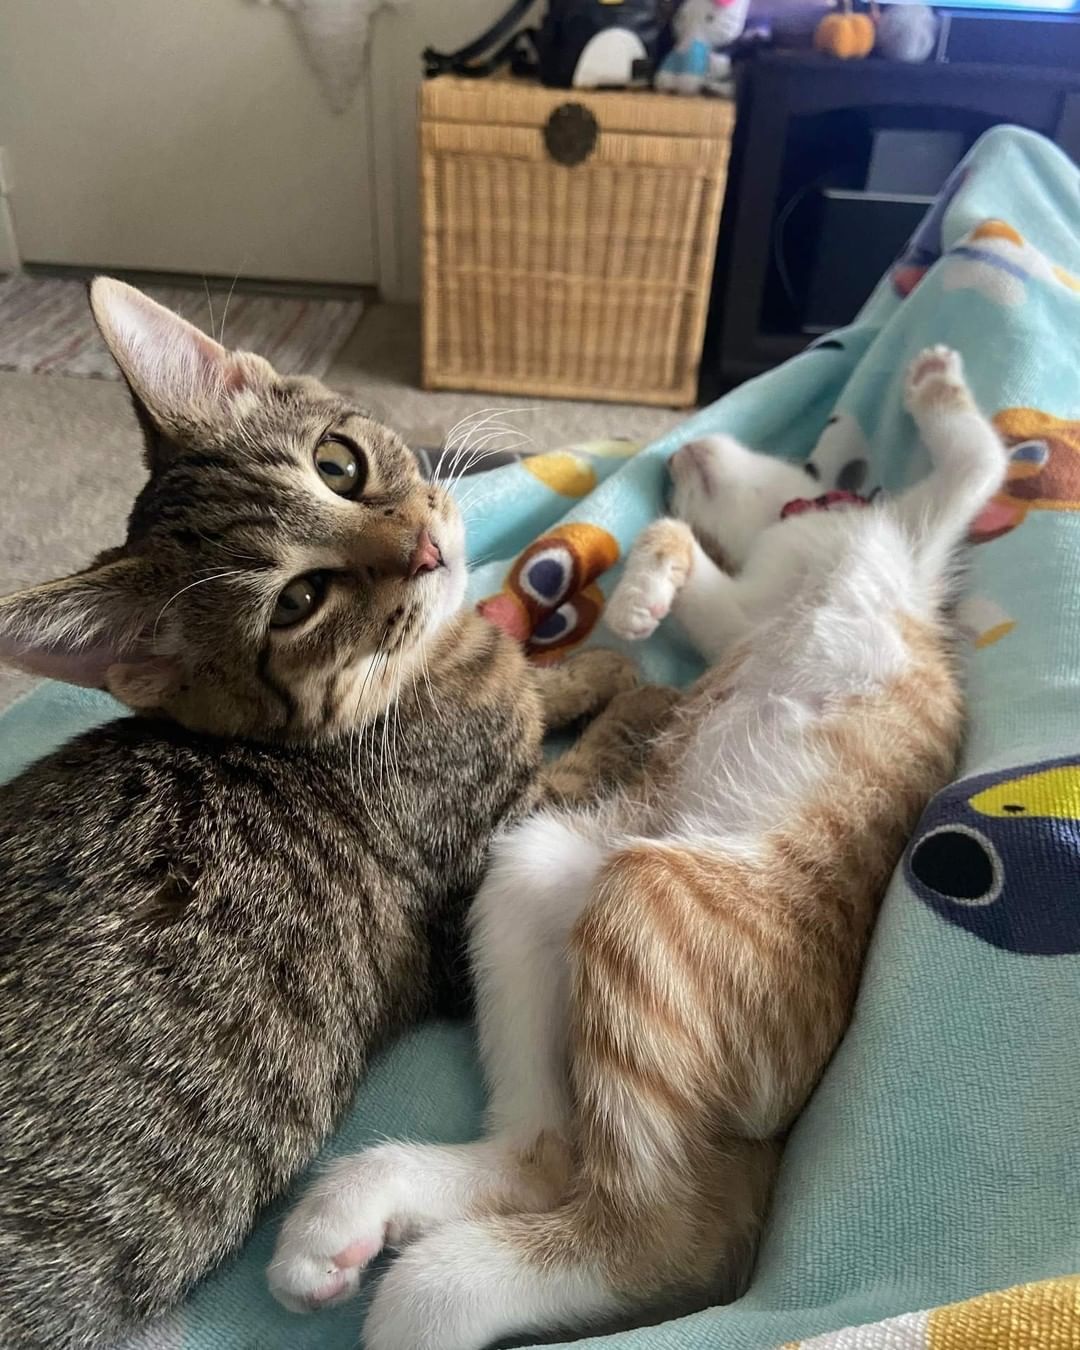 We always say kittens do better in pairs, and this pair were best friends in their foster home. 

Rambo (now Jinjo) & Petrie (now Oliver) are being spoiled rotten in their forever home! It's so rewarding to see our babies happy! <a target='_blank' href='https://www.instagram.com/explore/tags/bestfriends/'>#bestfriends</a>